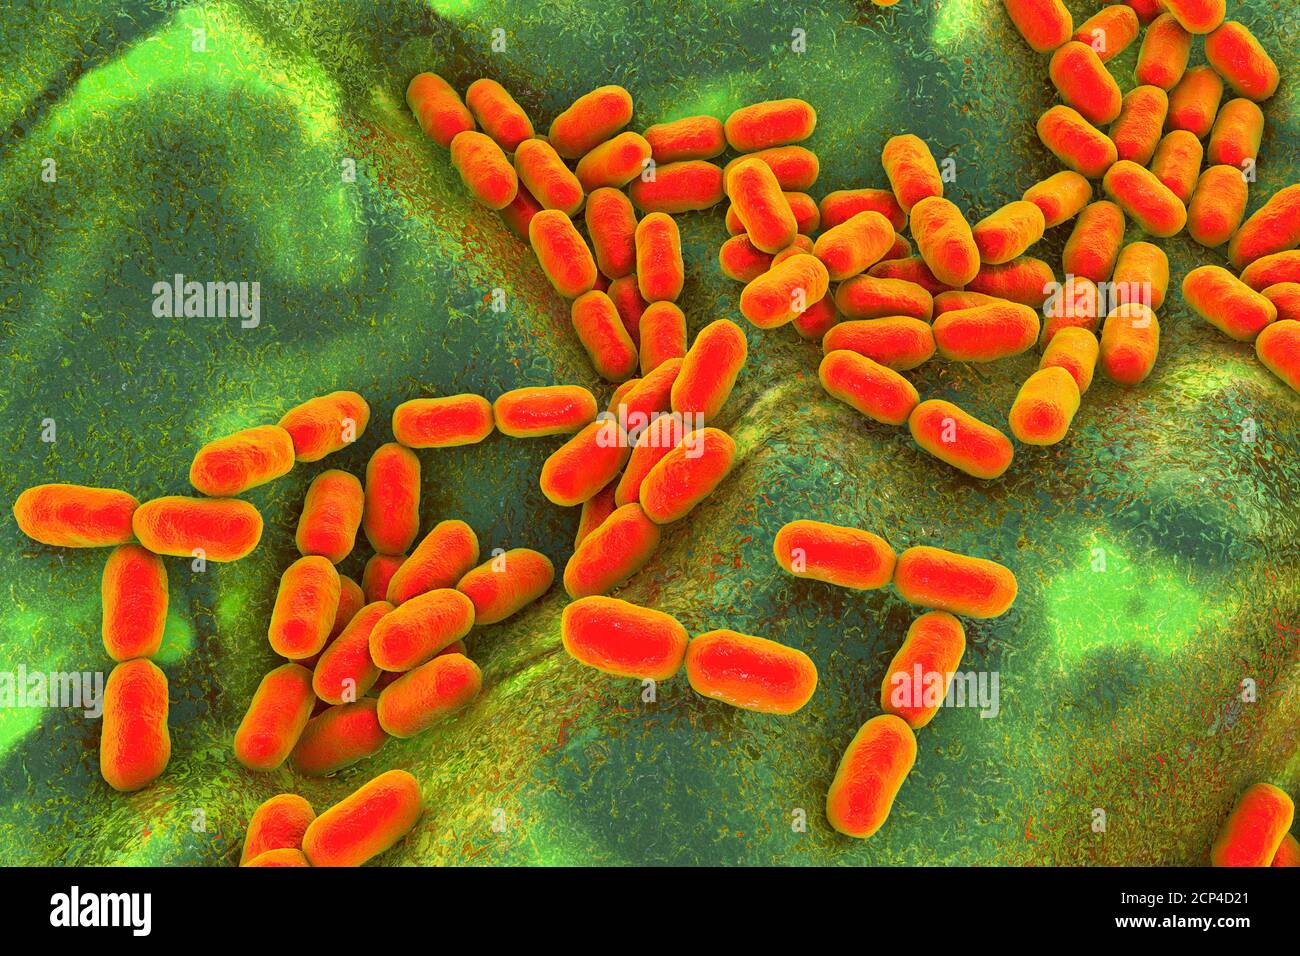 Kingella kingae bacteria, computer illustration. K. kingae is a Gram-negative coccobacillus that is part of the normal flora of children's throats. It Stock Photo